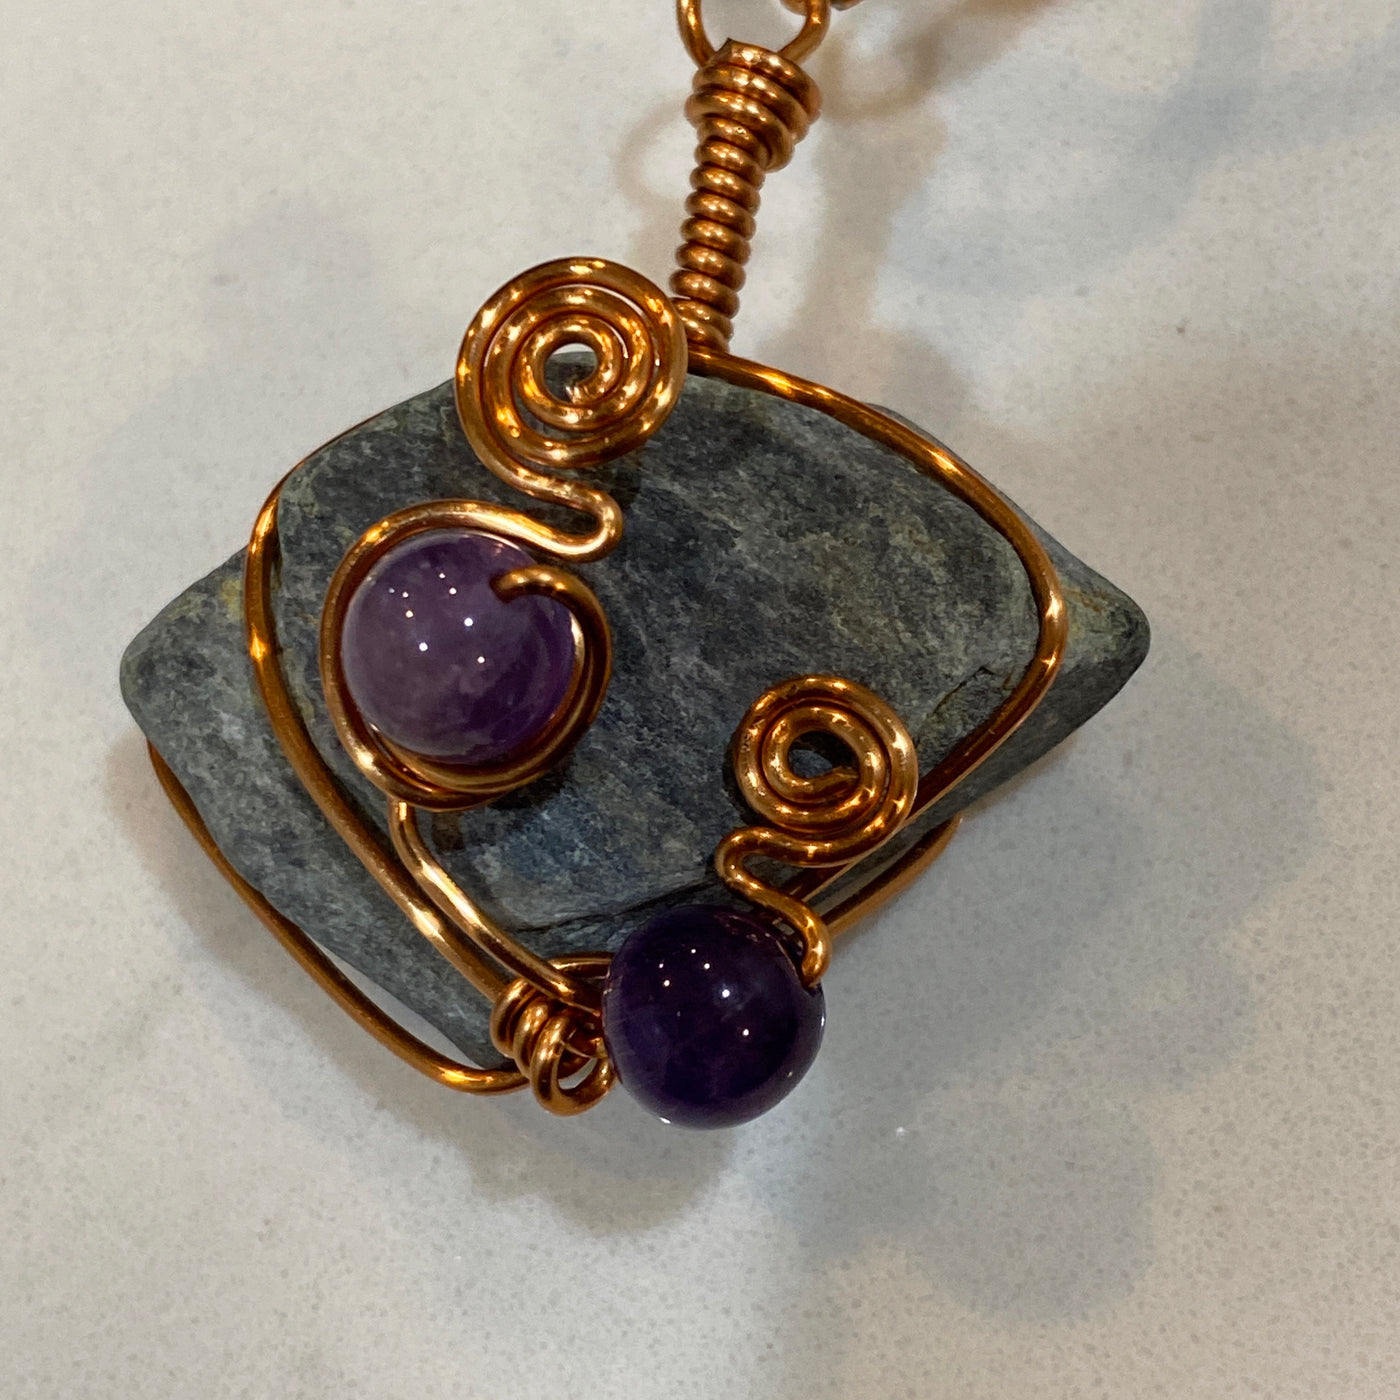 Grey natural stone, amethyst and wire. Small pendant. One of my favourite pendants of the whole Elbastones collection.